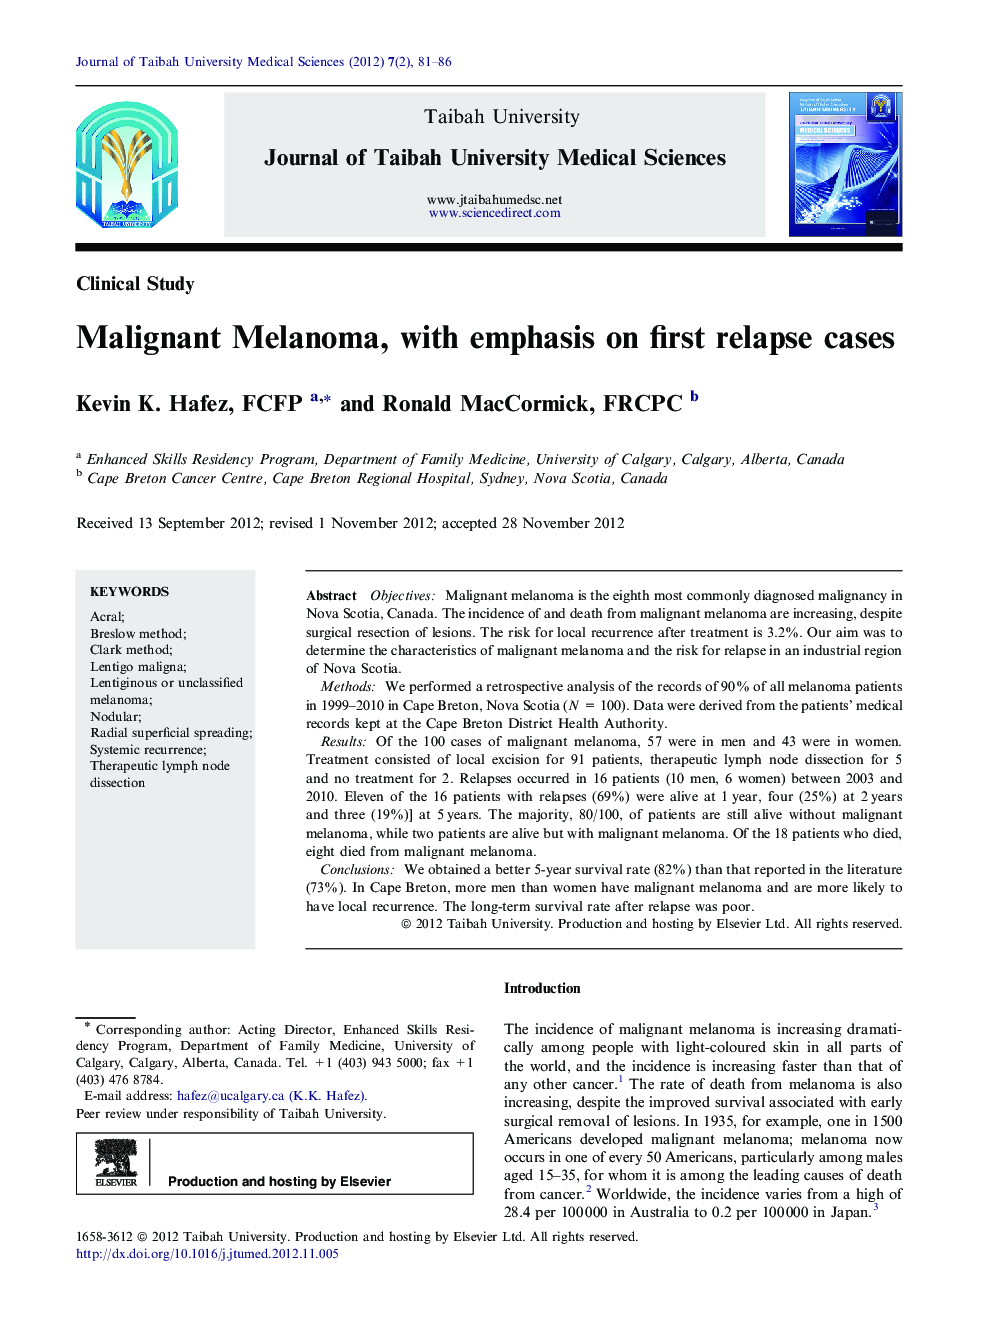 Malignant Melanoma, with emphasis on first relapse cases 